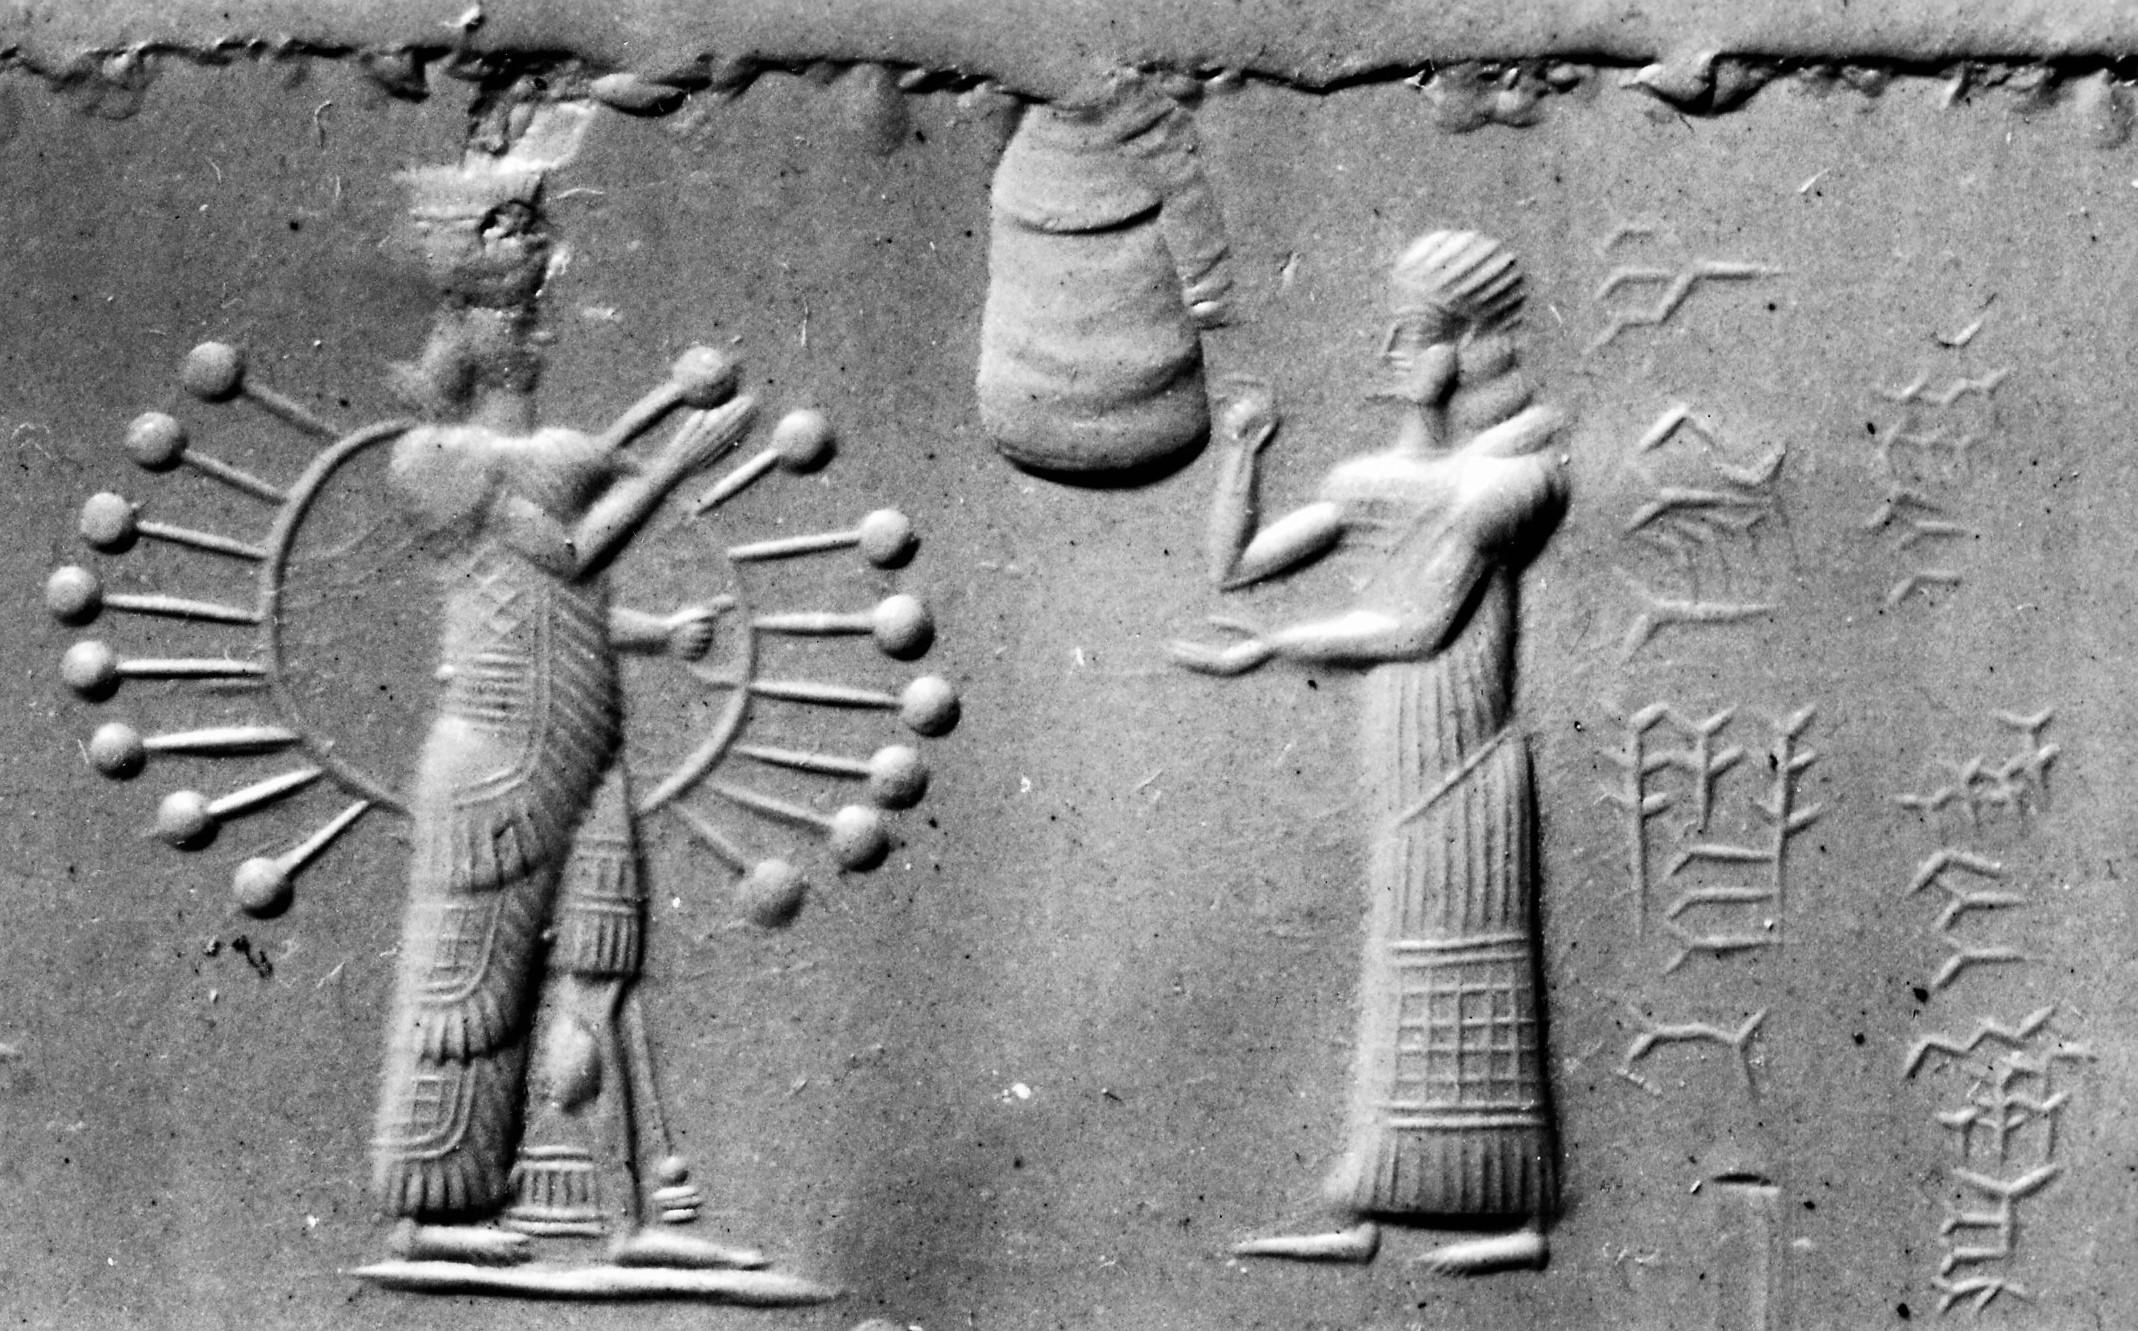 2ae - fantastic artifact of the Goddess of War Inanna with all her majesty, & her cautioning grandaunt Ninhursag pleading for peace